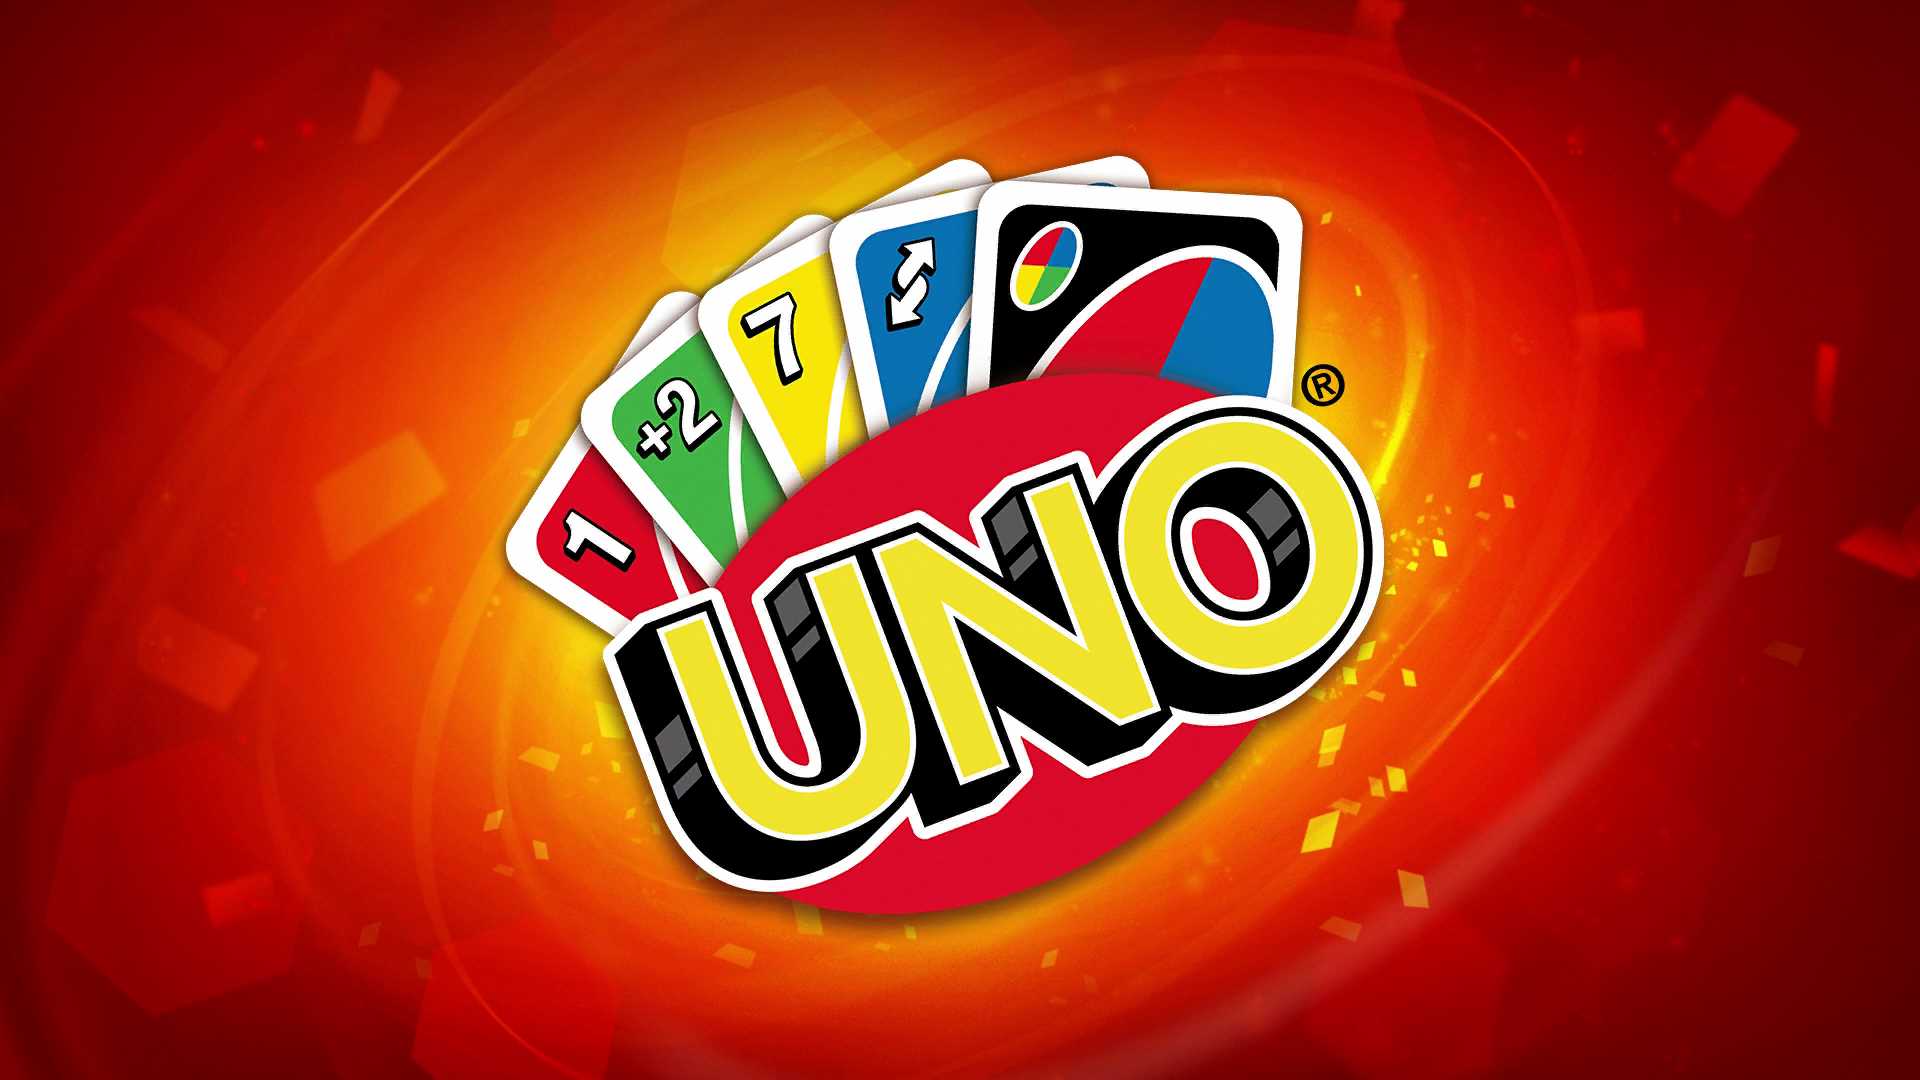 Uno Online: 4 Colors download the new for ios